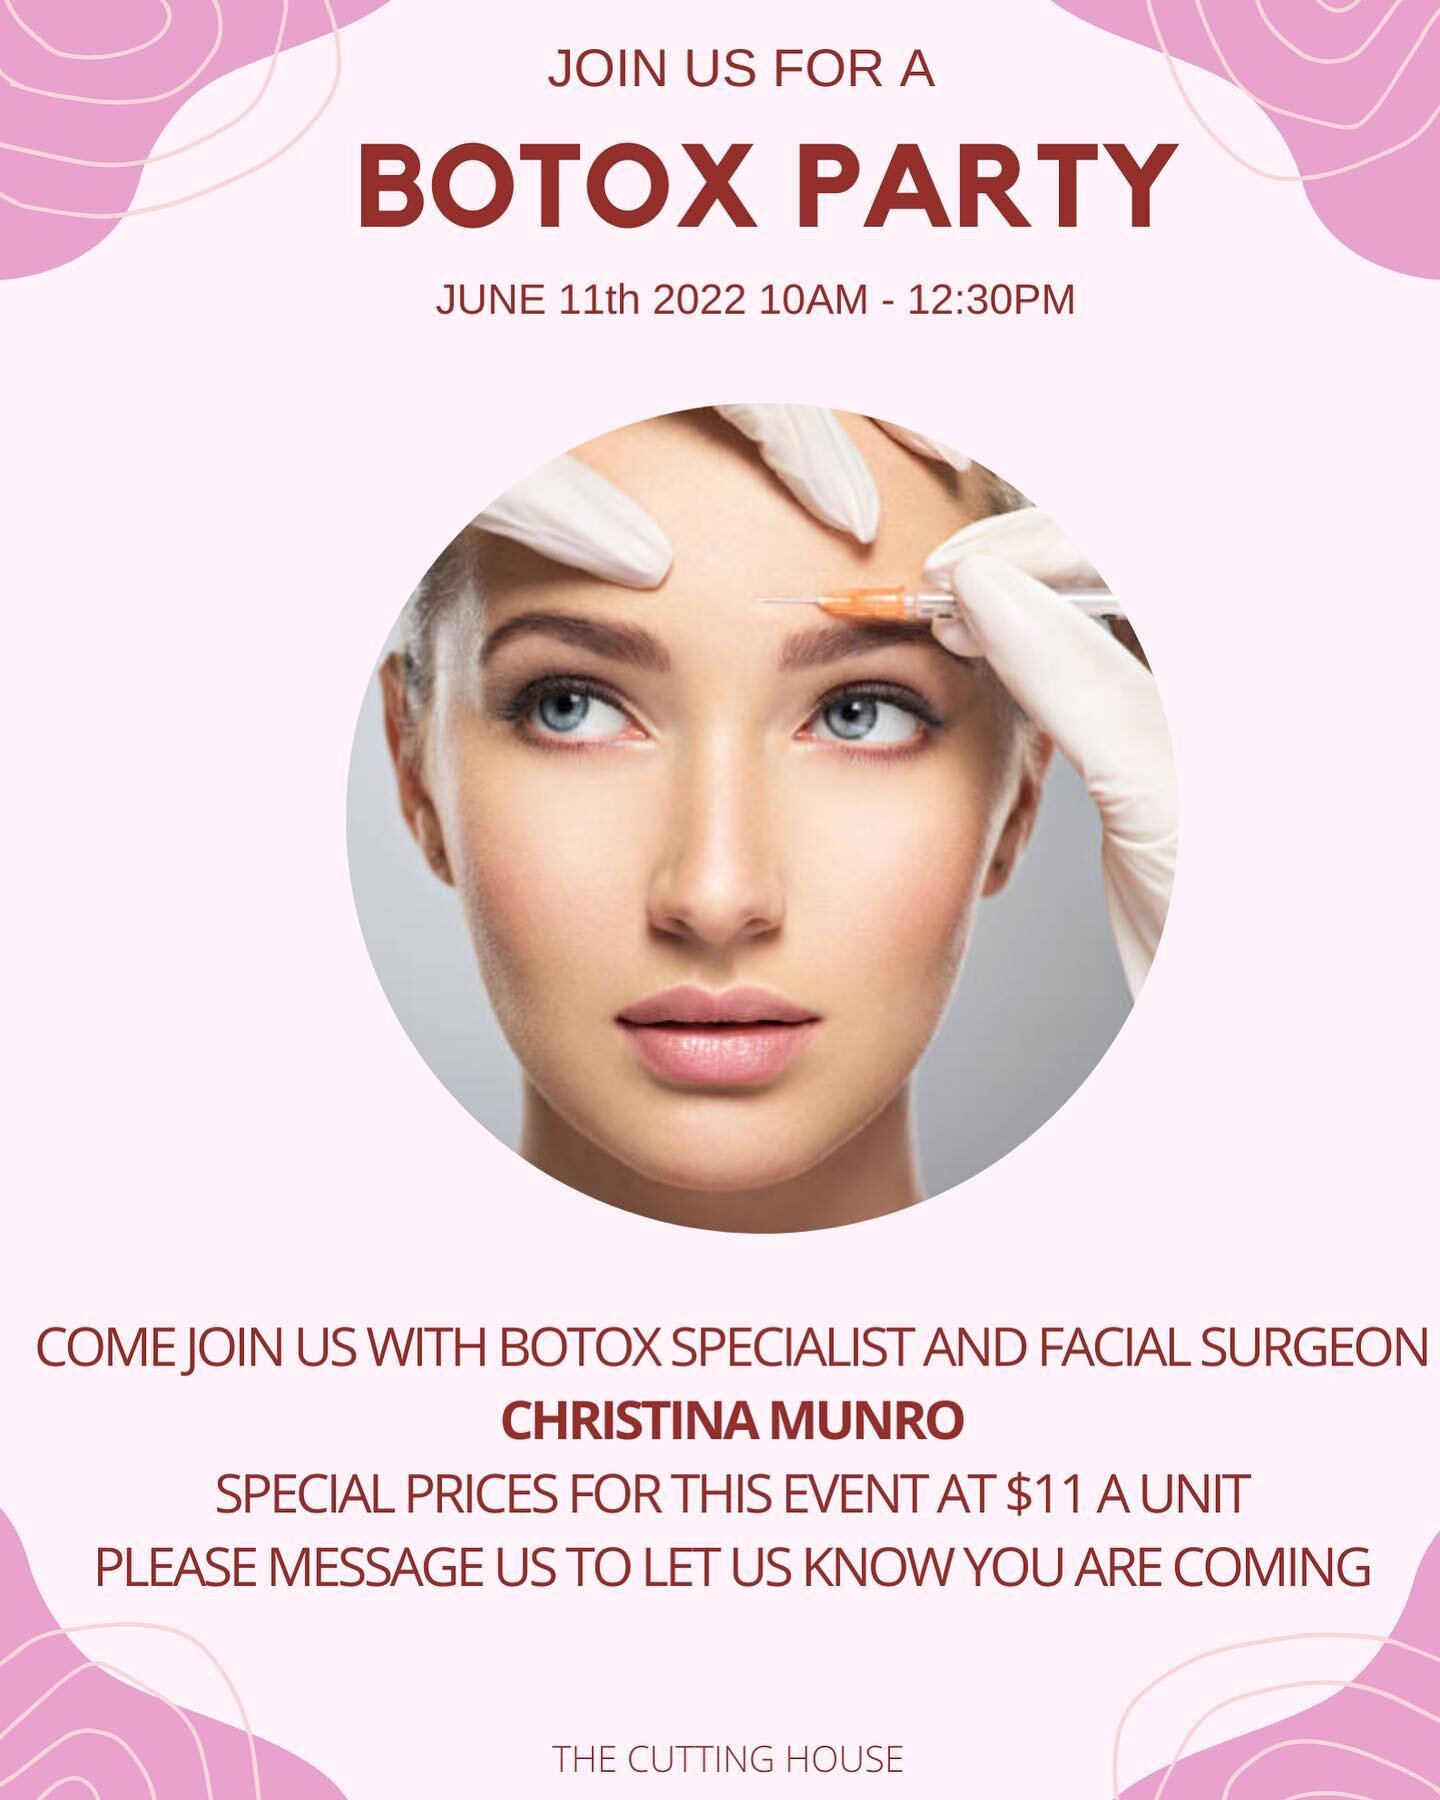 COME JOIN US FOR A BOTOX PARTY HOSTED AT THE CUTTING HOUSE! IF YOU HAVE ANY QUESTIONS PLEASE MESSAGE OR CALL US.